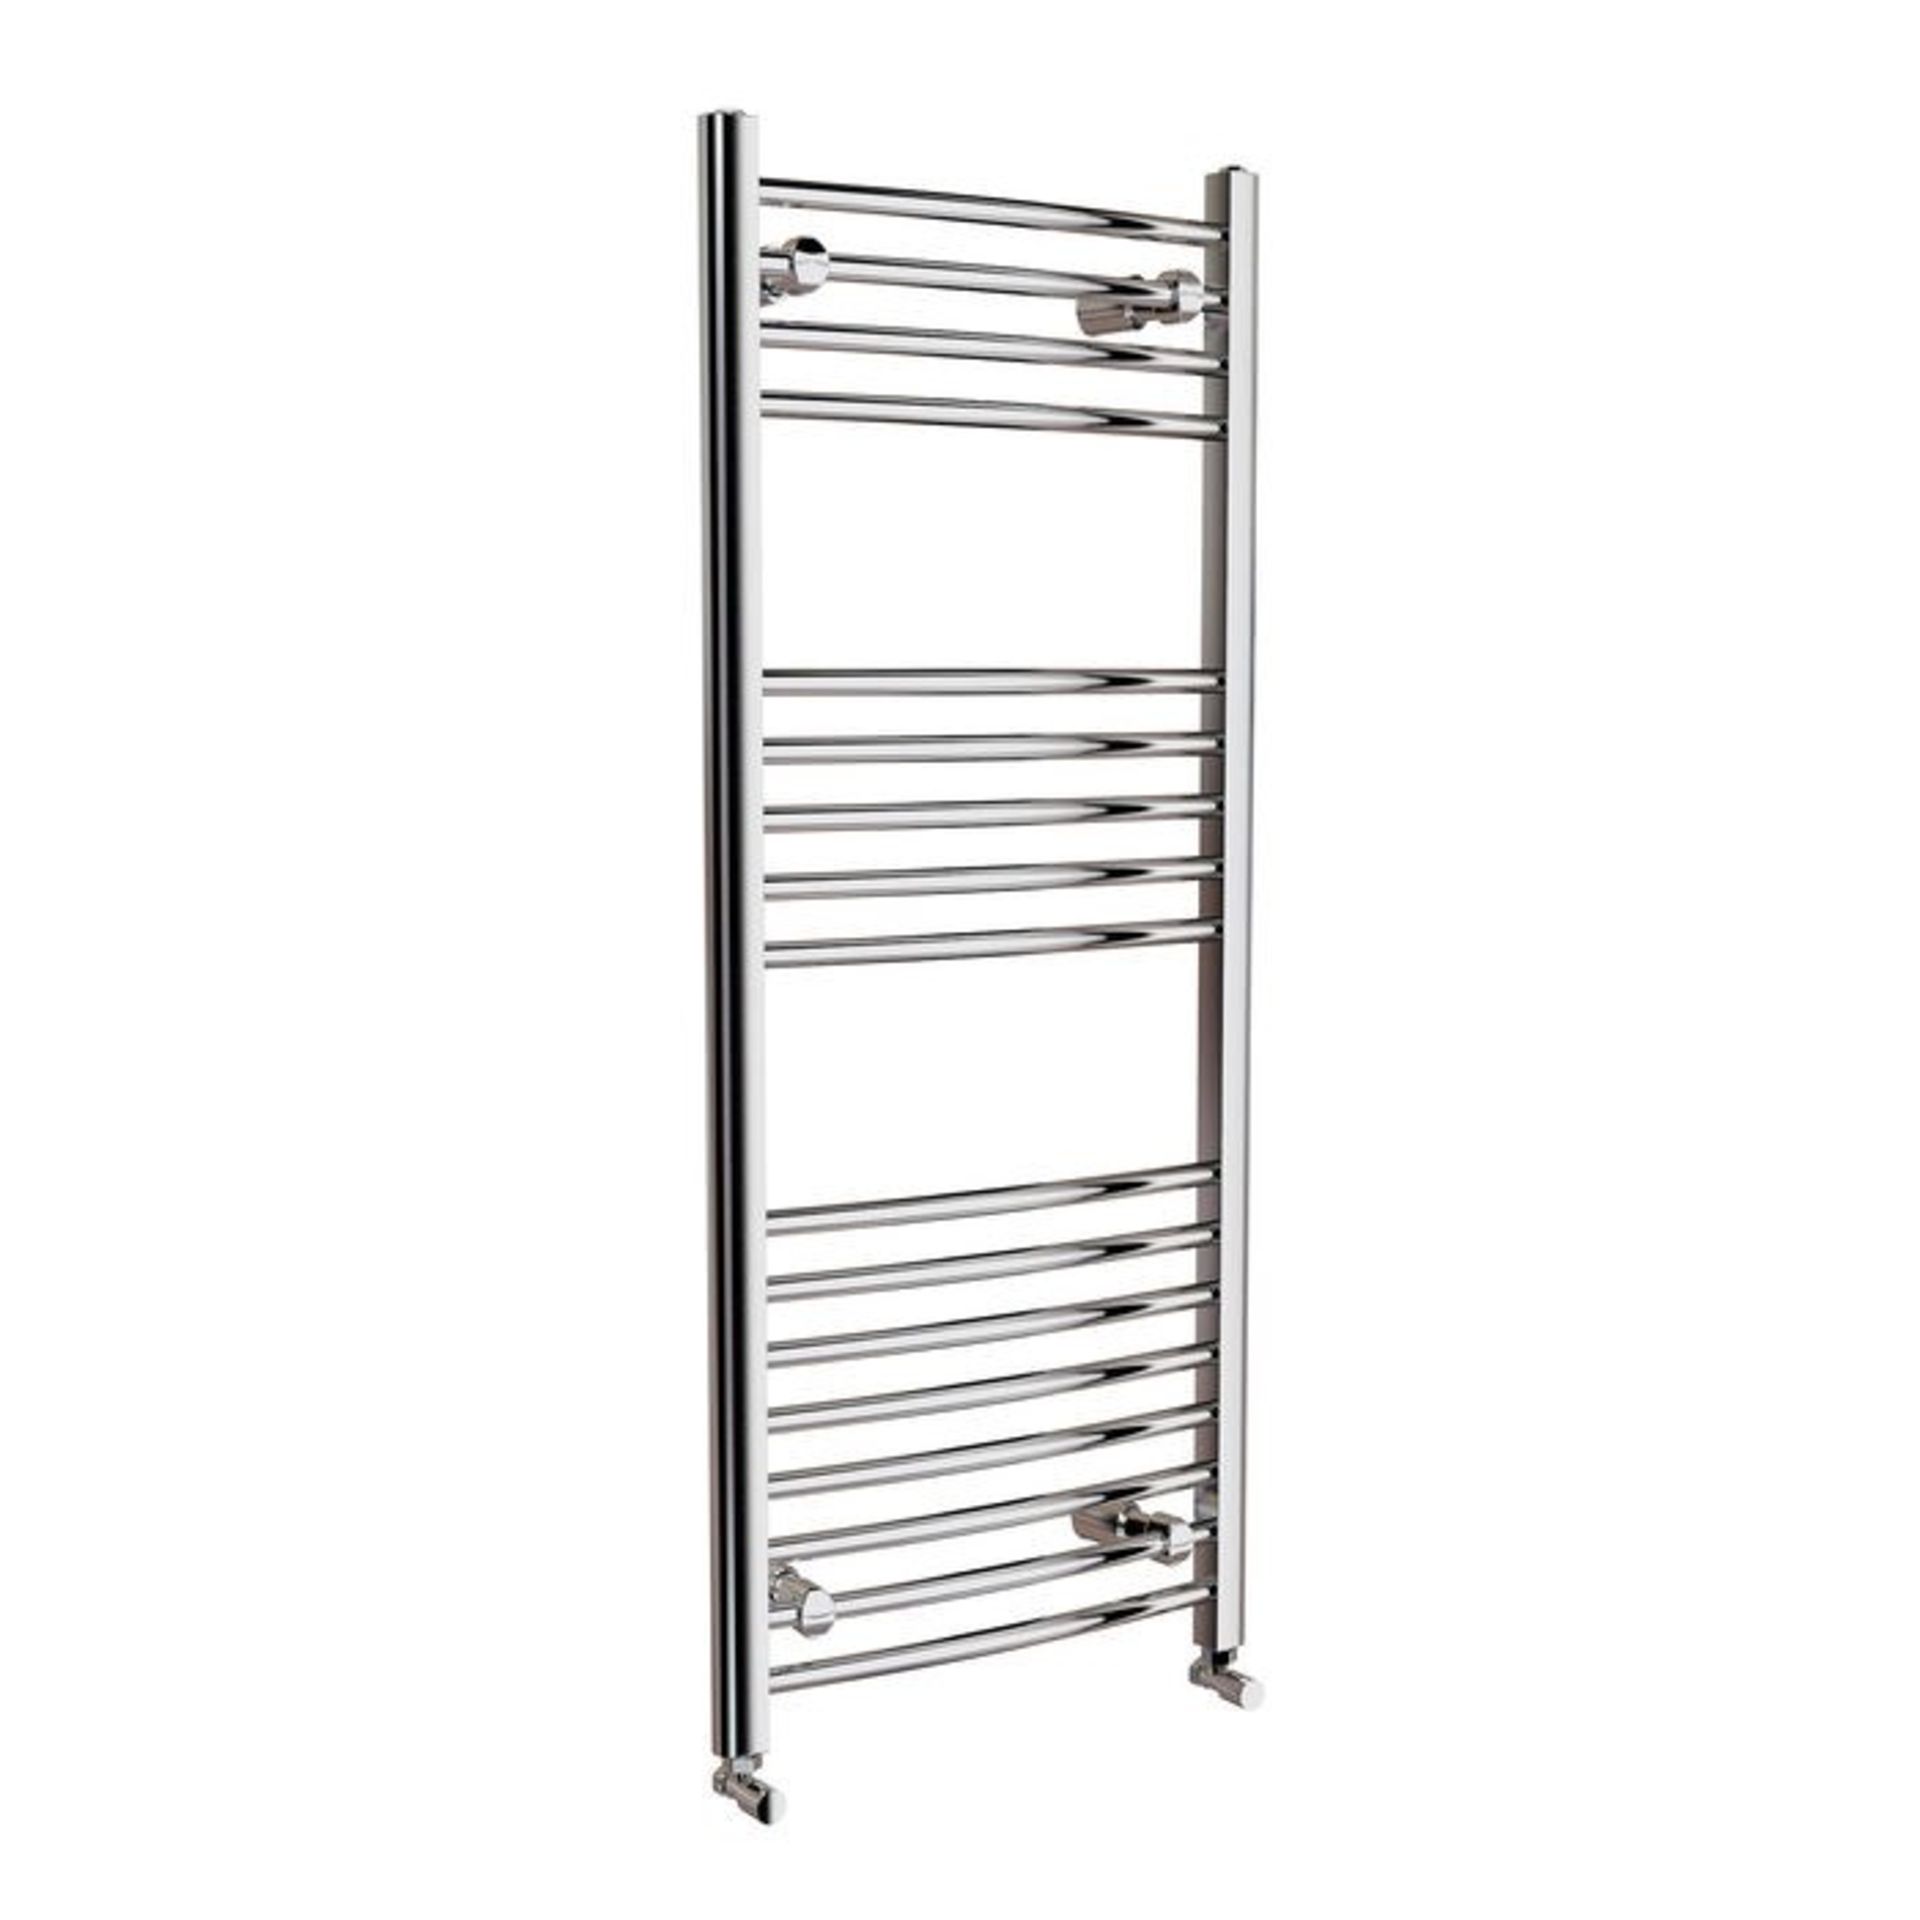 (HM140) 1100x450mm - 20mm Tubes - Chrome Curved Rail Ladder Towel Radiator. RRP £259.99.Made f... - Image 3 of 3